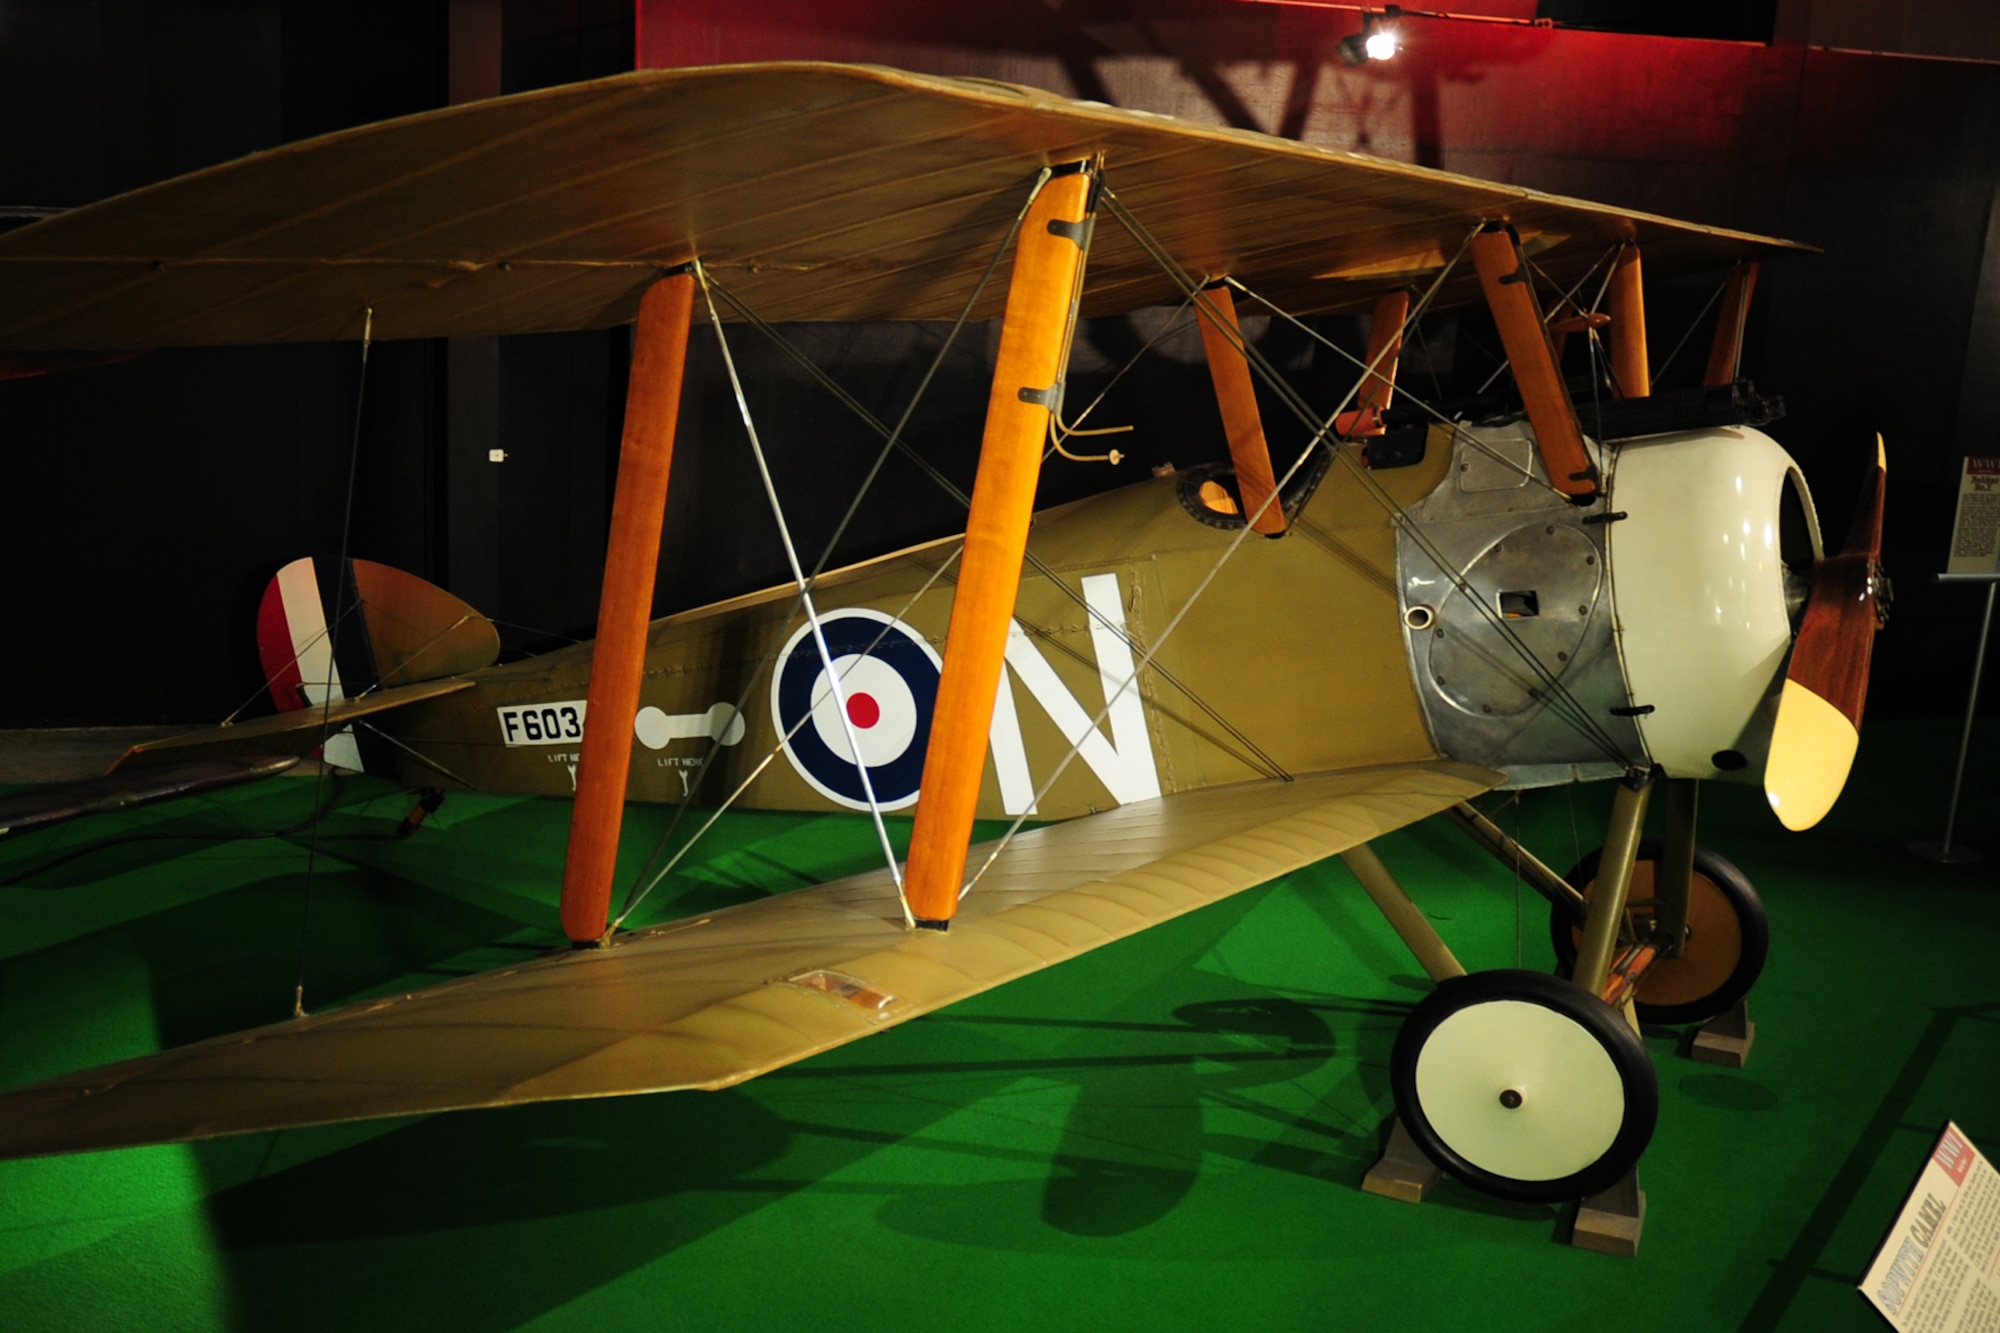 DAYTON, Ohio -- Sopwith Camel F.1 in the Early Years Gallery at the National Museum of the United States Air Force. (U.S. Air Force photo)